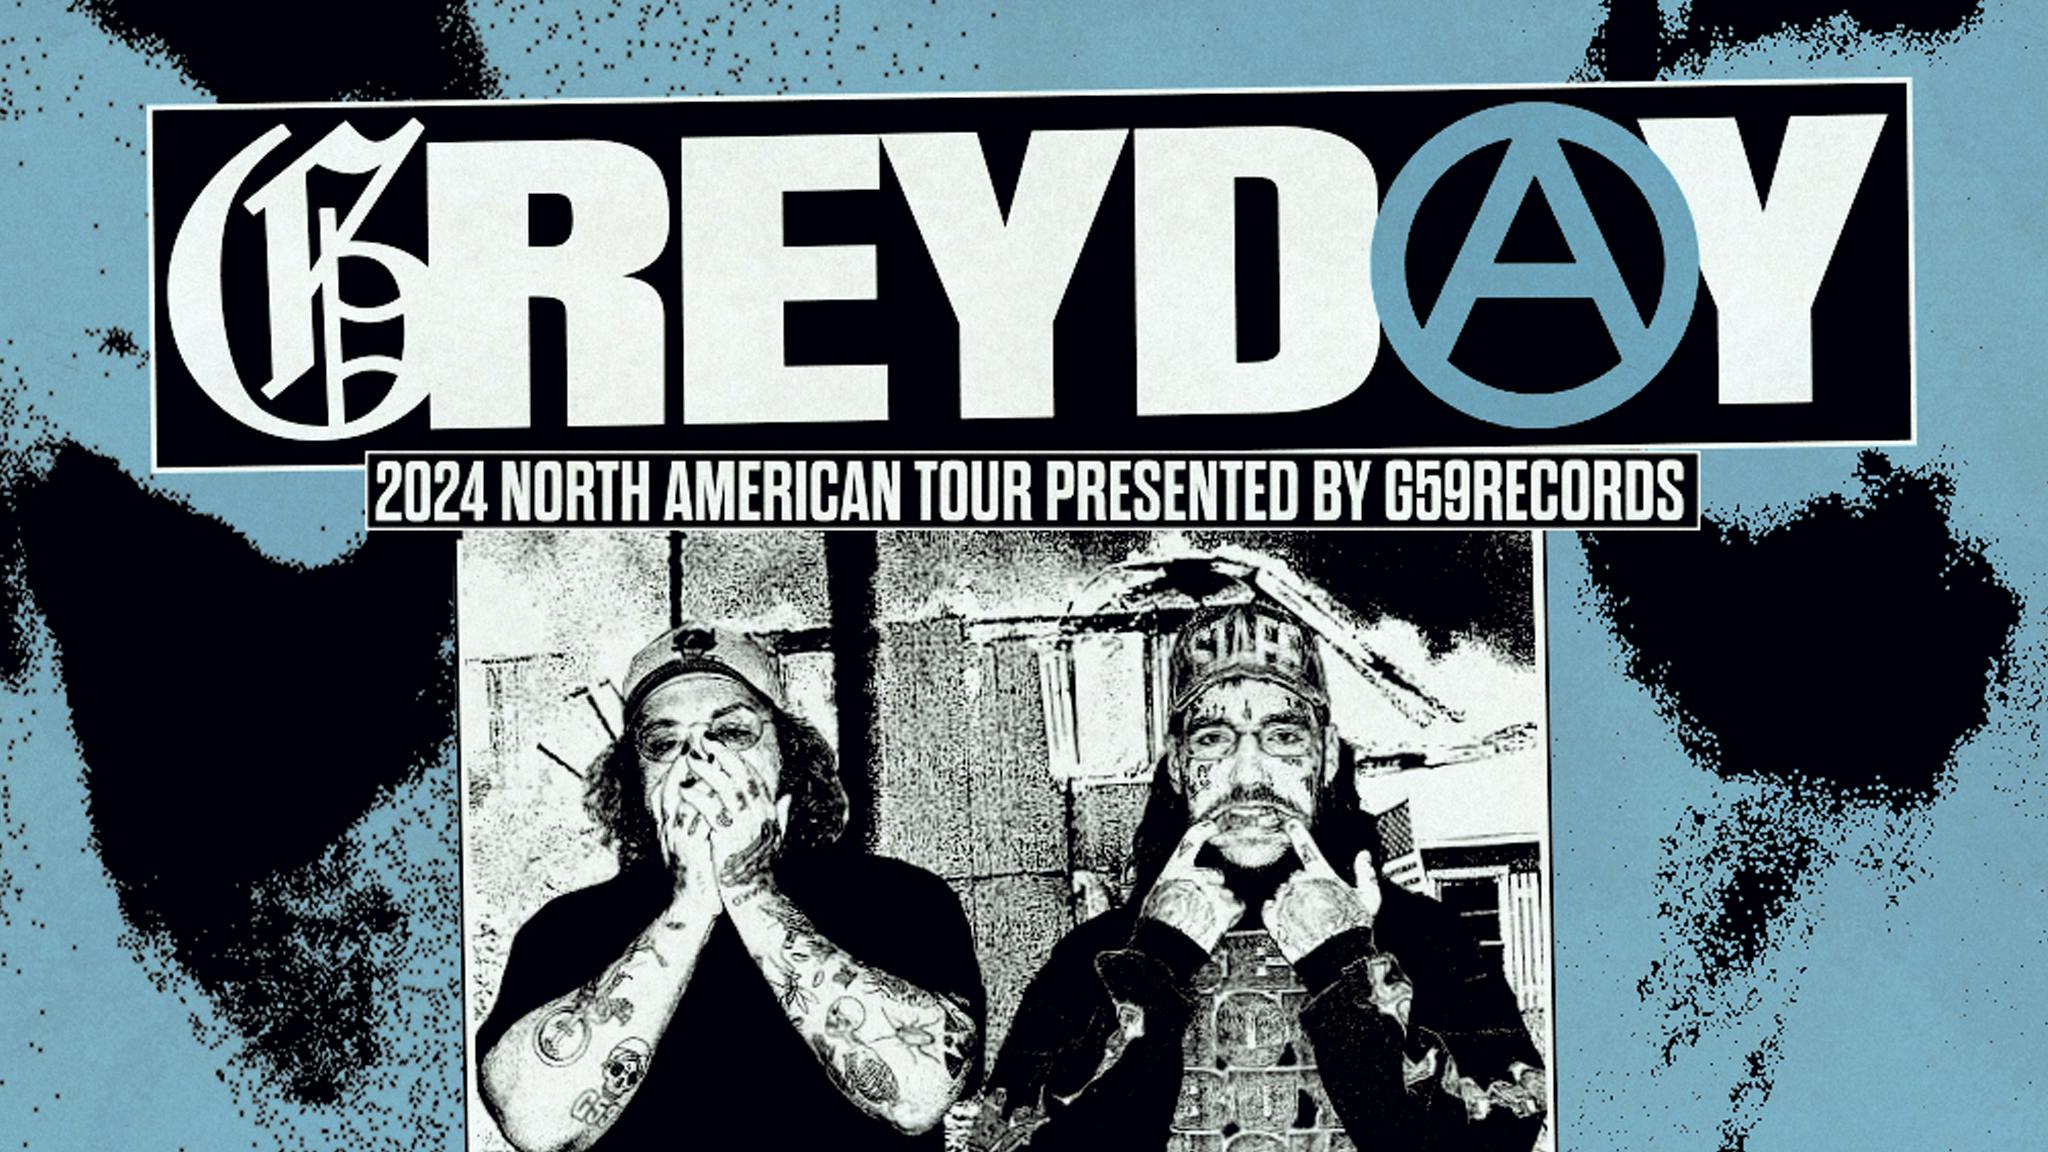 $uicideboy$ announce Grey Day Tour with Denzel Curry, EKKSTACY and more